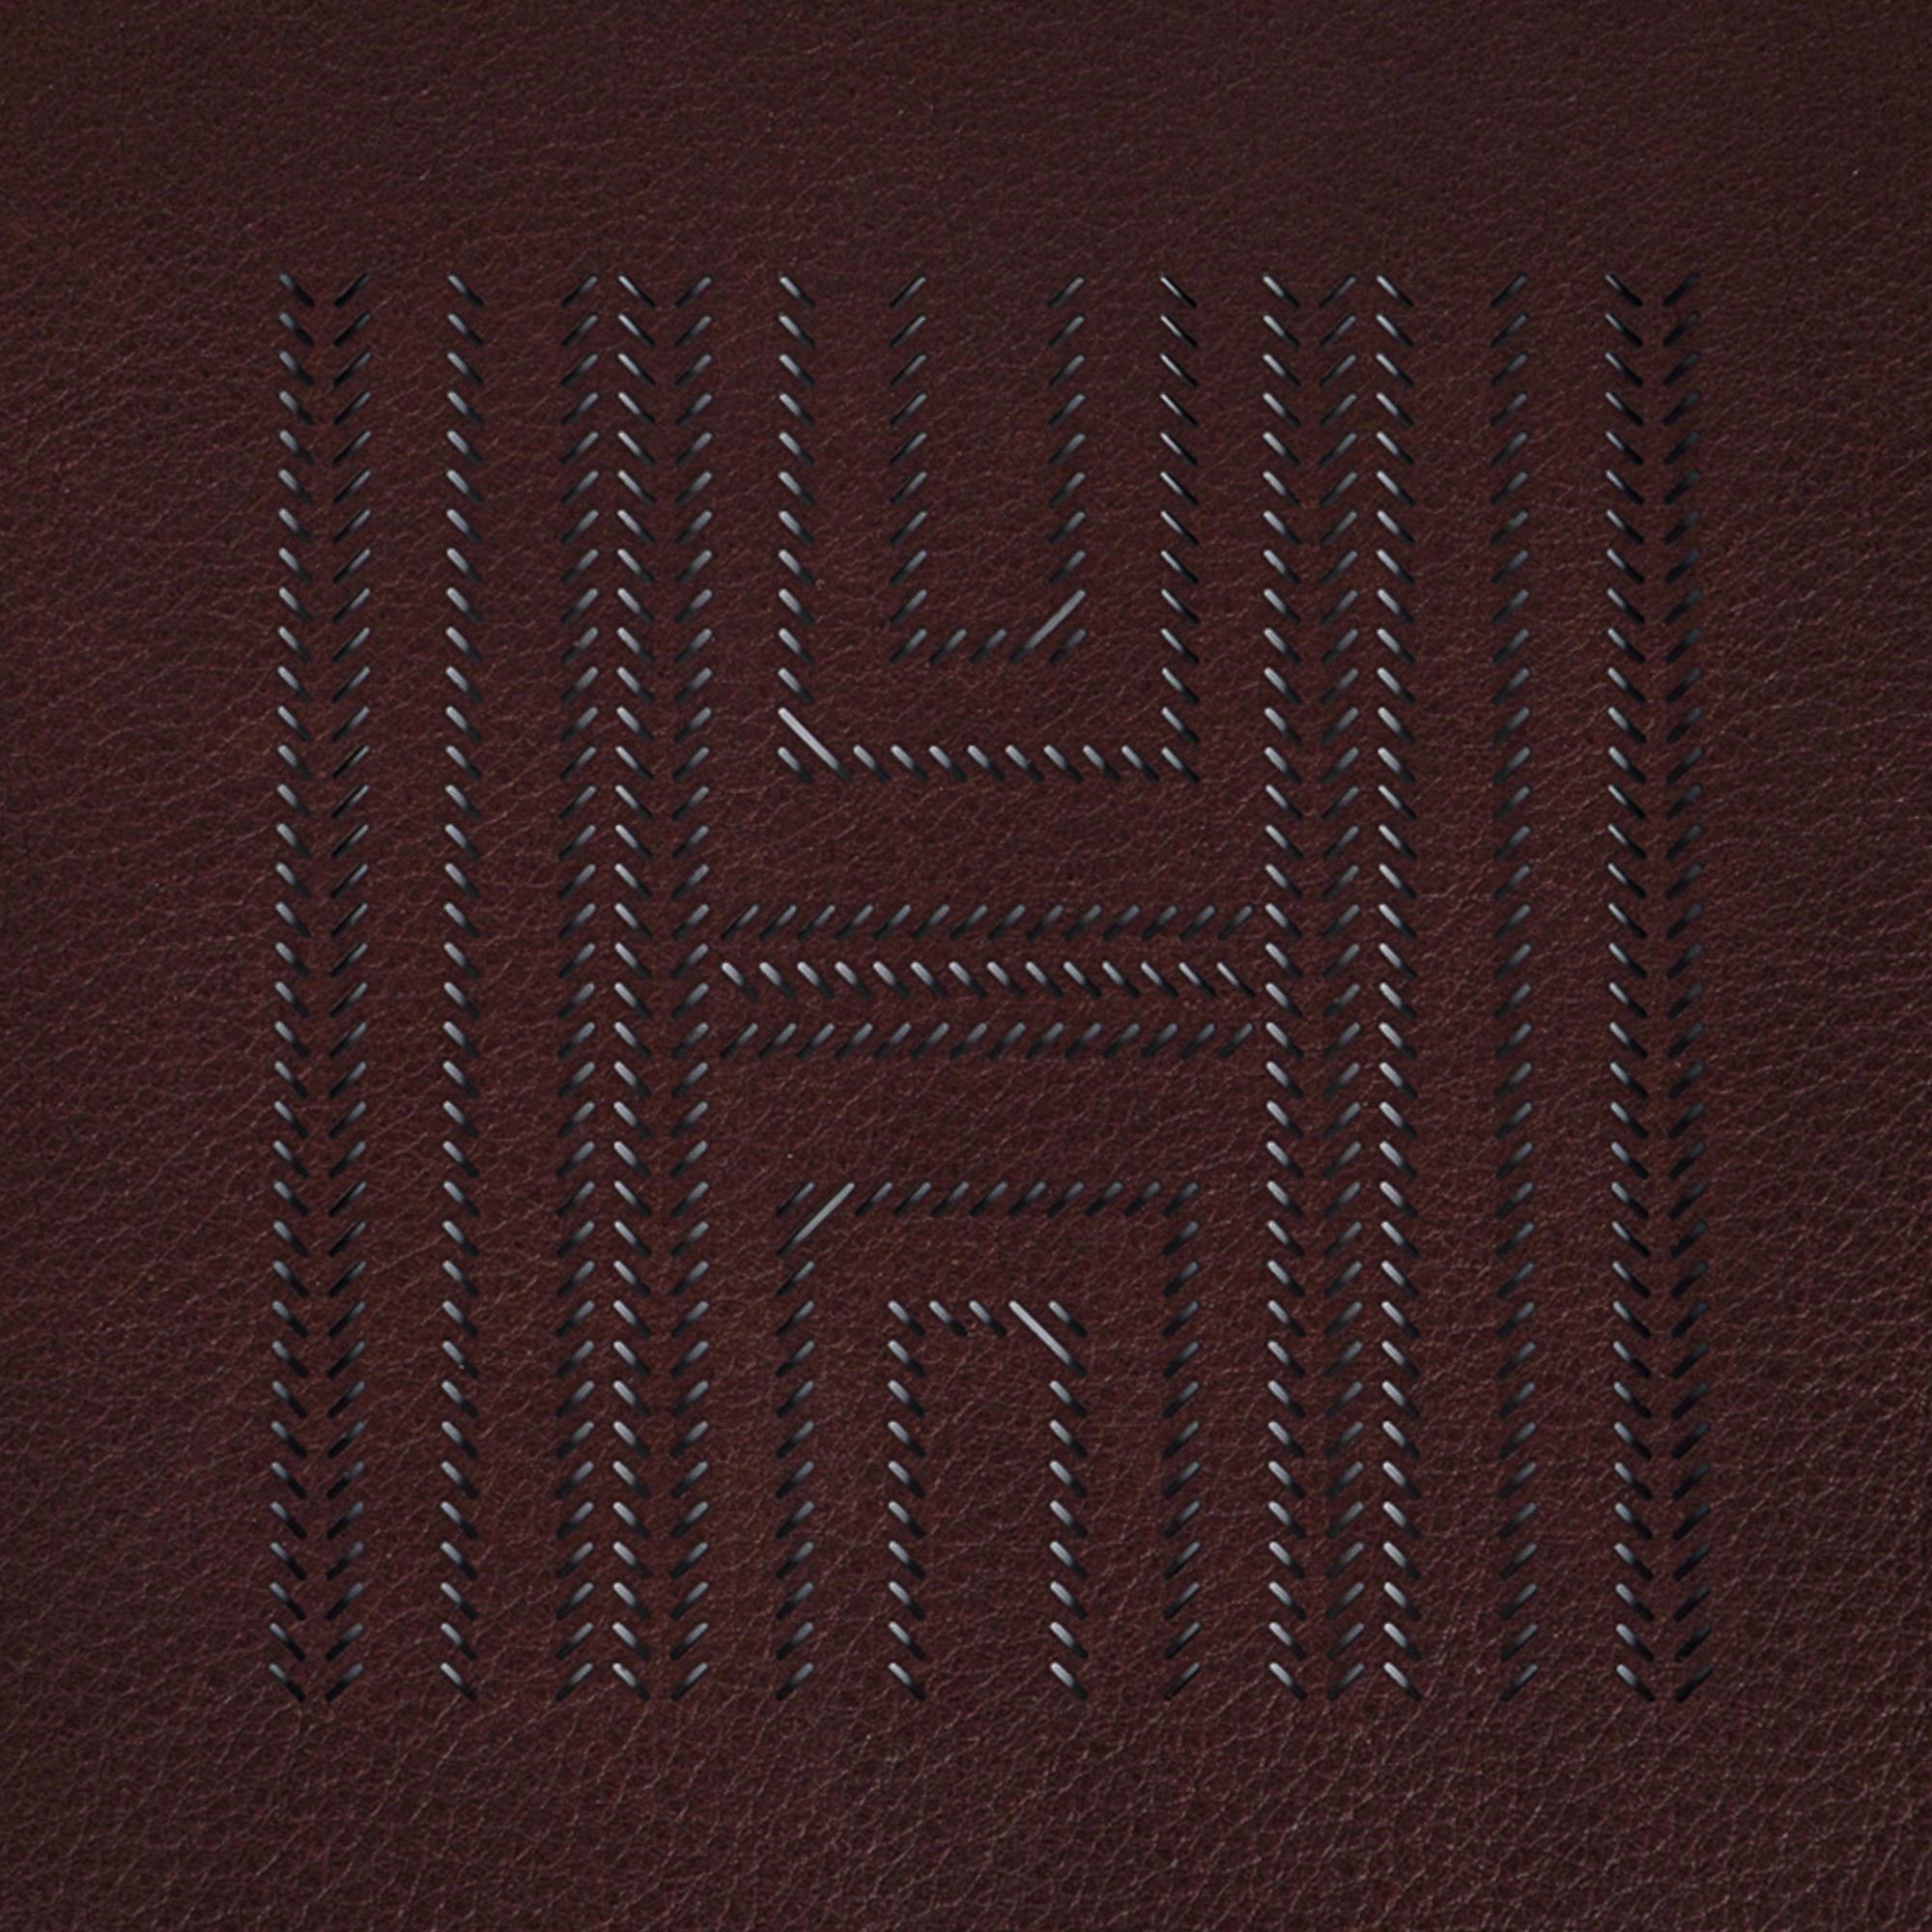 Guaranteed authentic Hermes H Chevrons Mises et Relances change tray.
Beautifully crafted featuring Bleu Regate and Ebene with white top stitch in Clemence leather. 
H Chevrons designed by laser perforation.
Palladium clou de selle snaps.
A